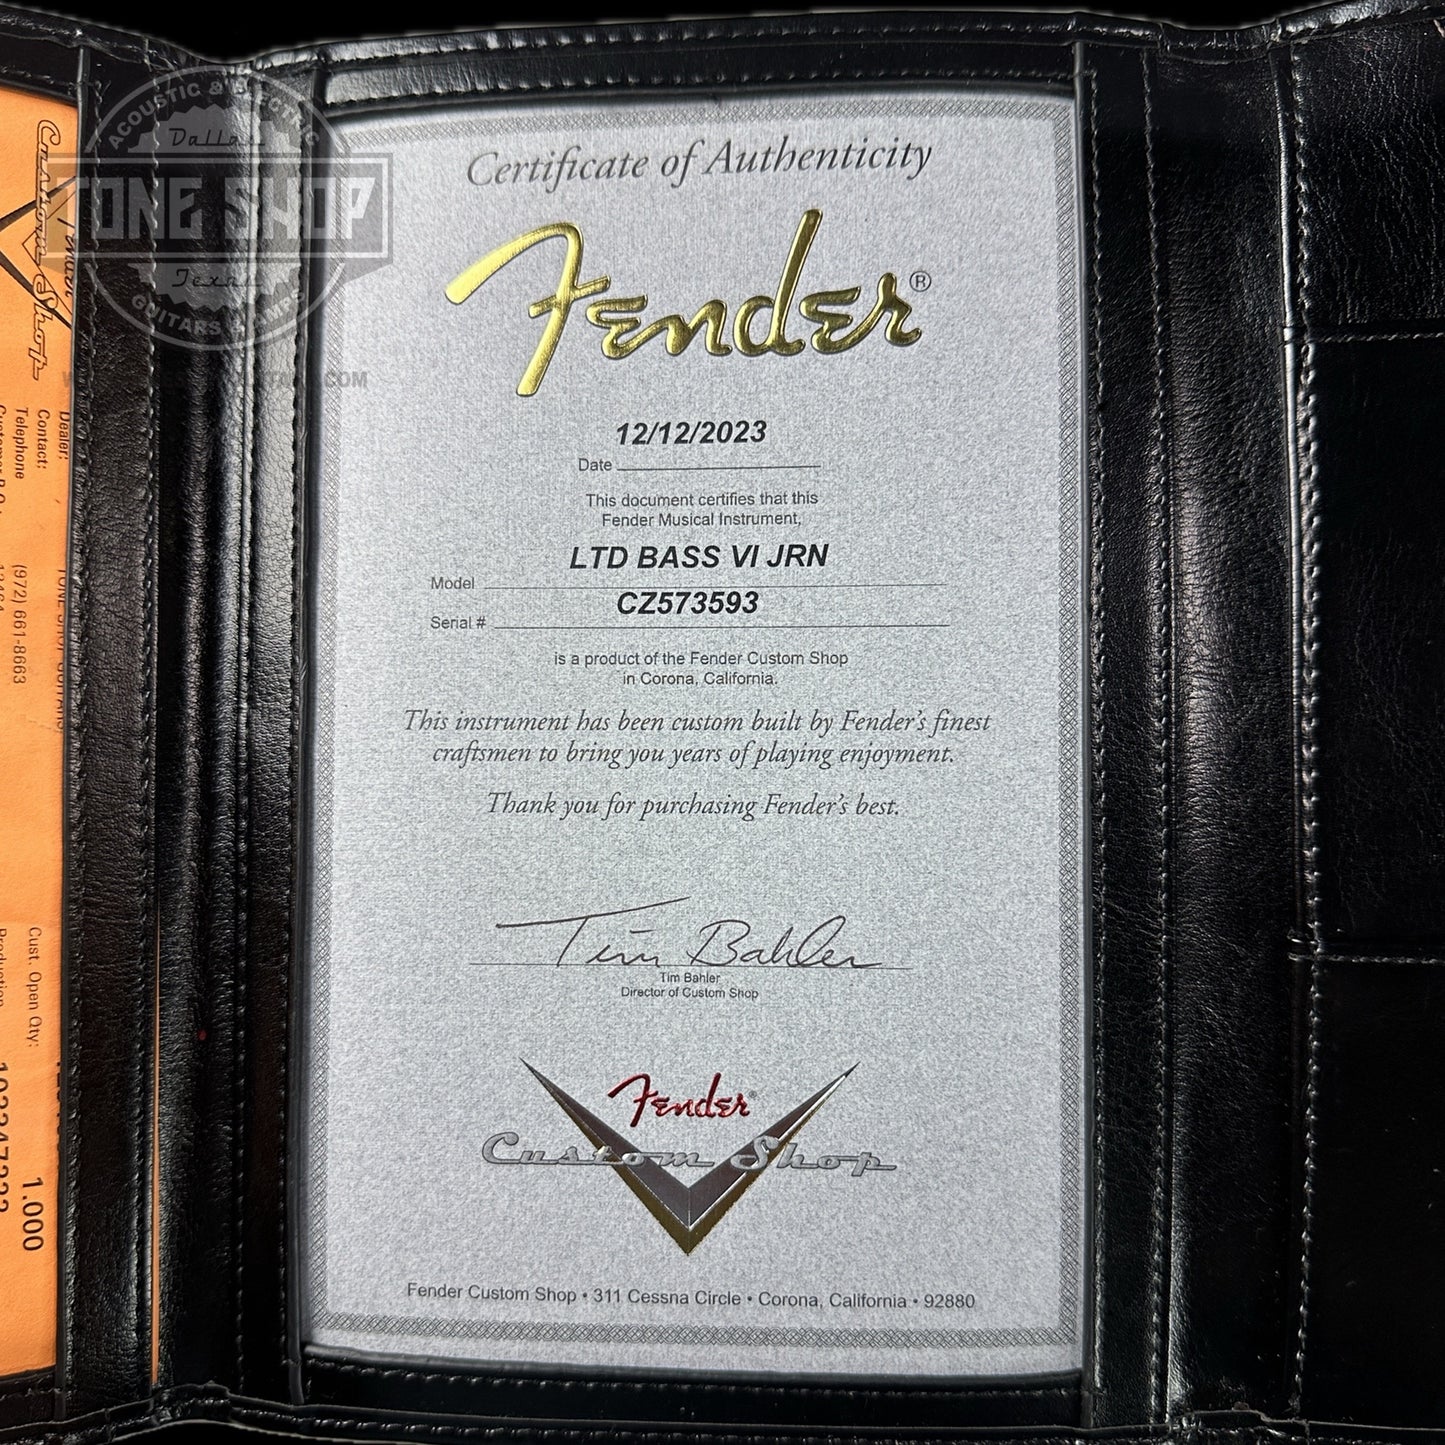 Certificate of authenticity for Fender Custom Shop Limited Edition Bass VI Journeyman Relic Aged Dakota Red.